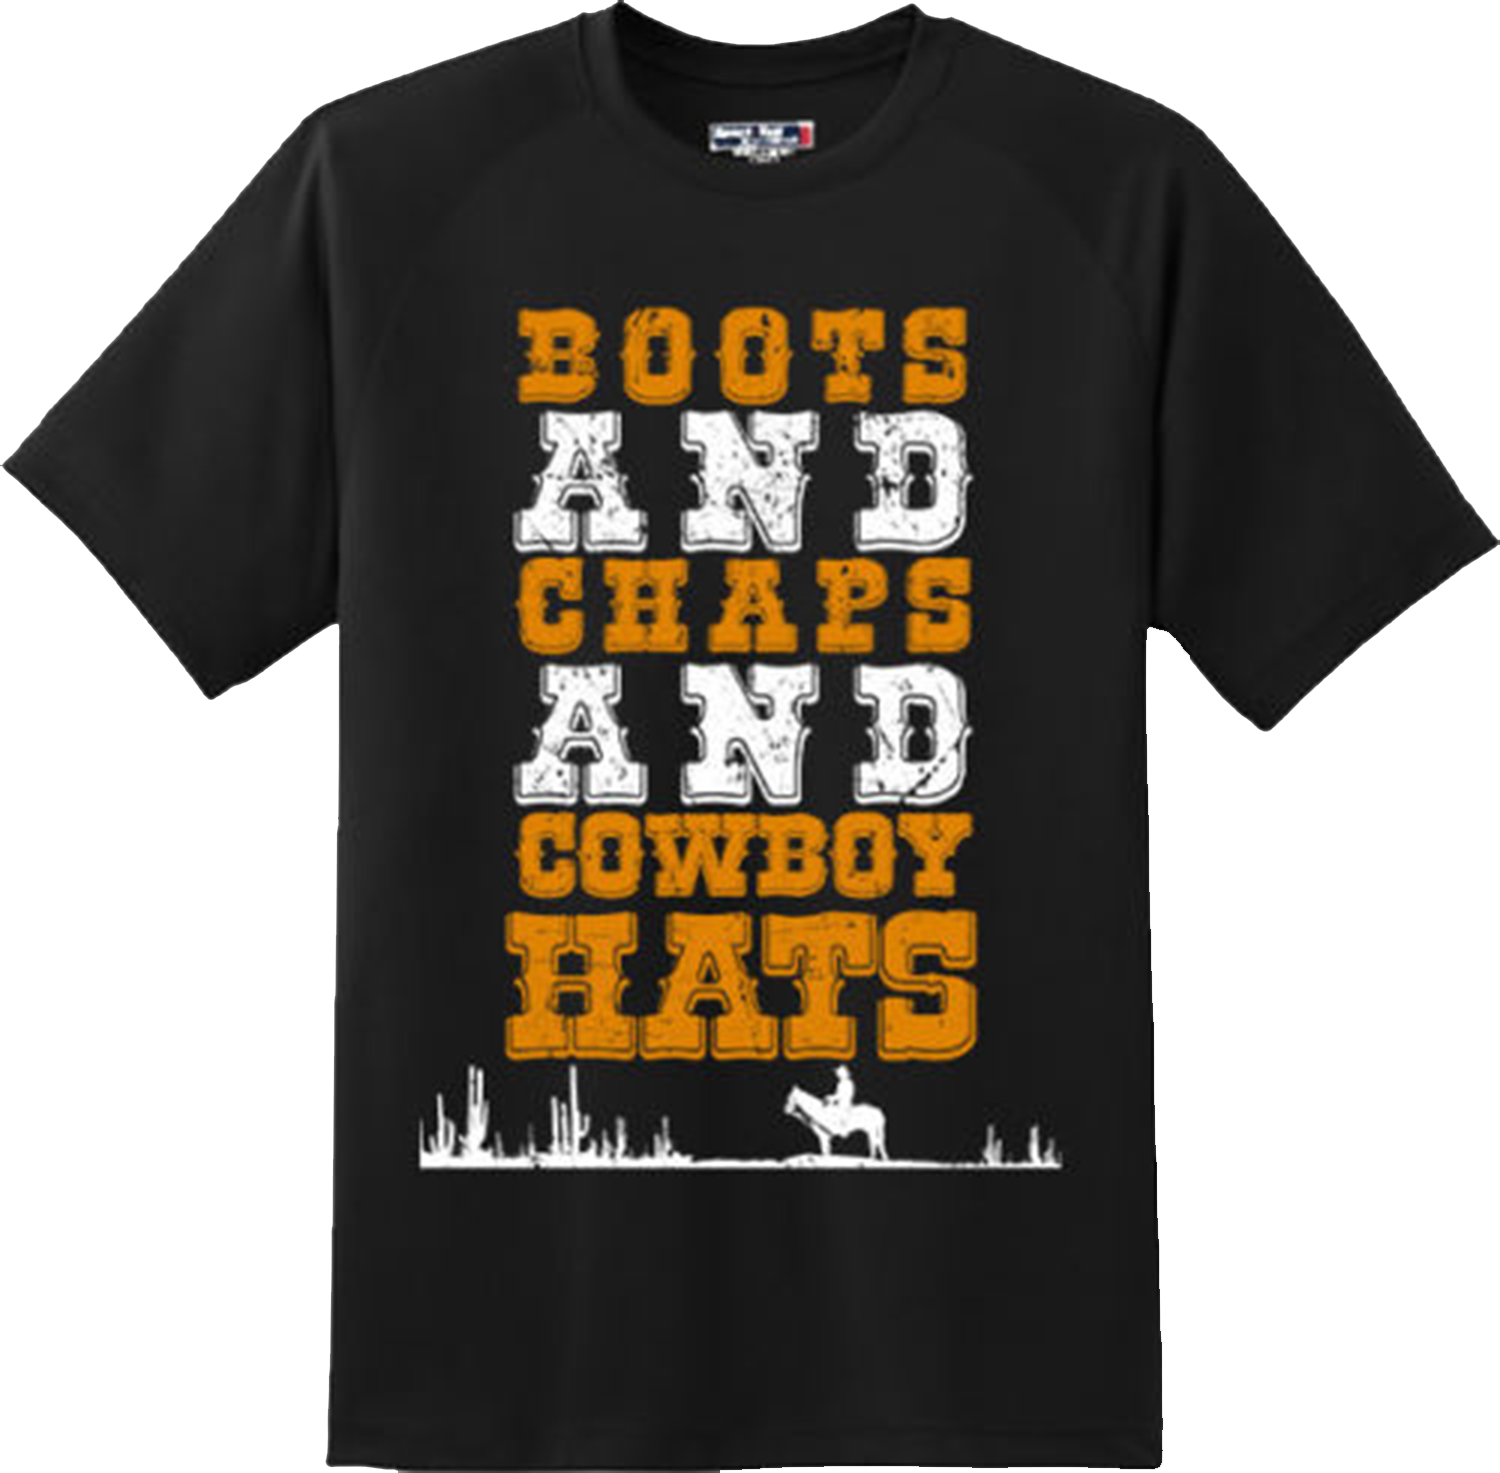 Funny Boots Chaps Cowboy Hats Country Southern Humor T Shirt New Graphic Tee